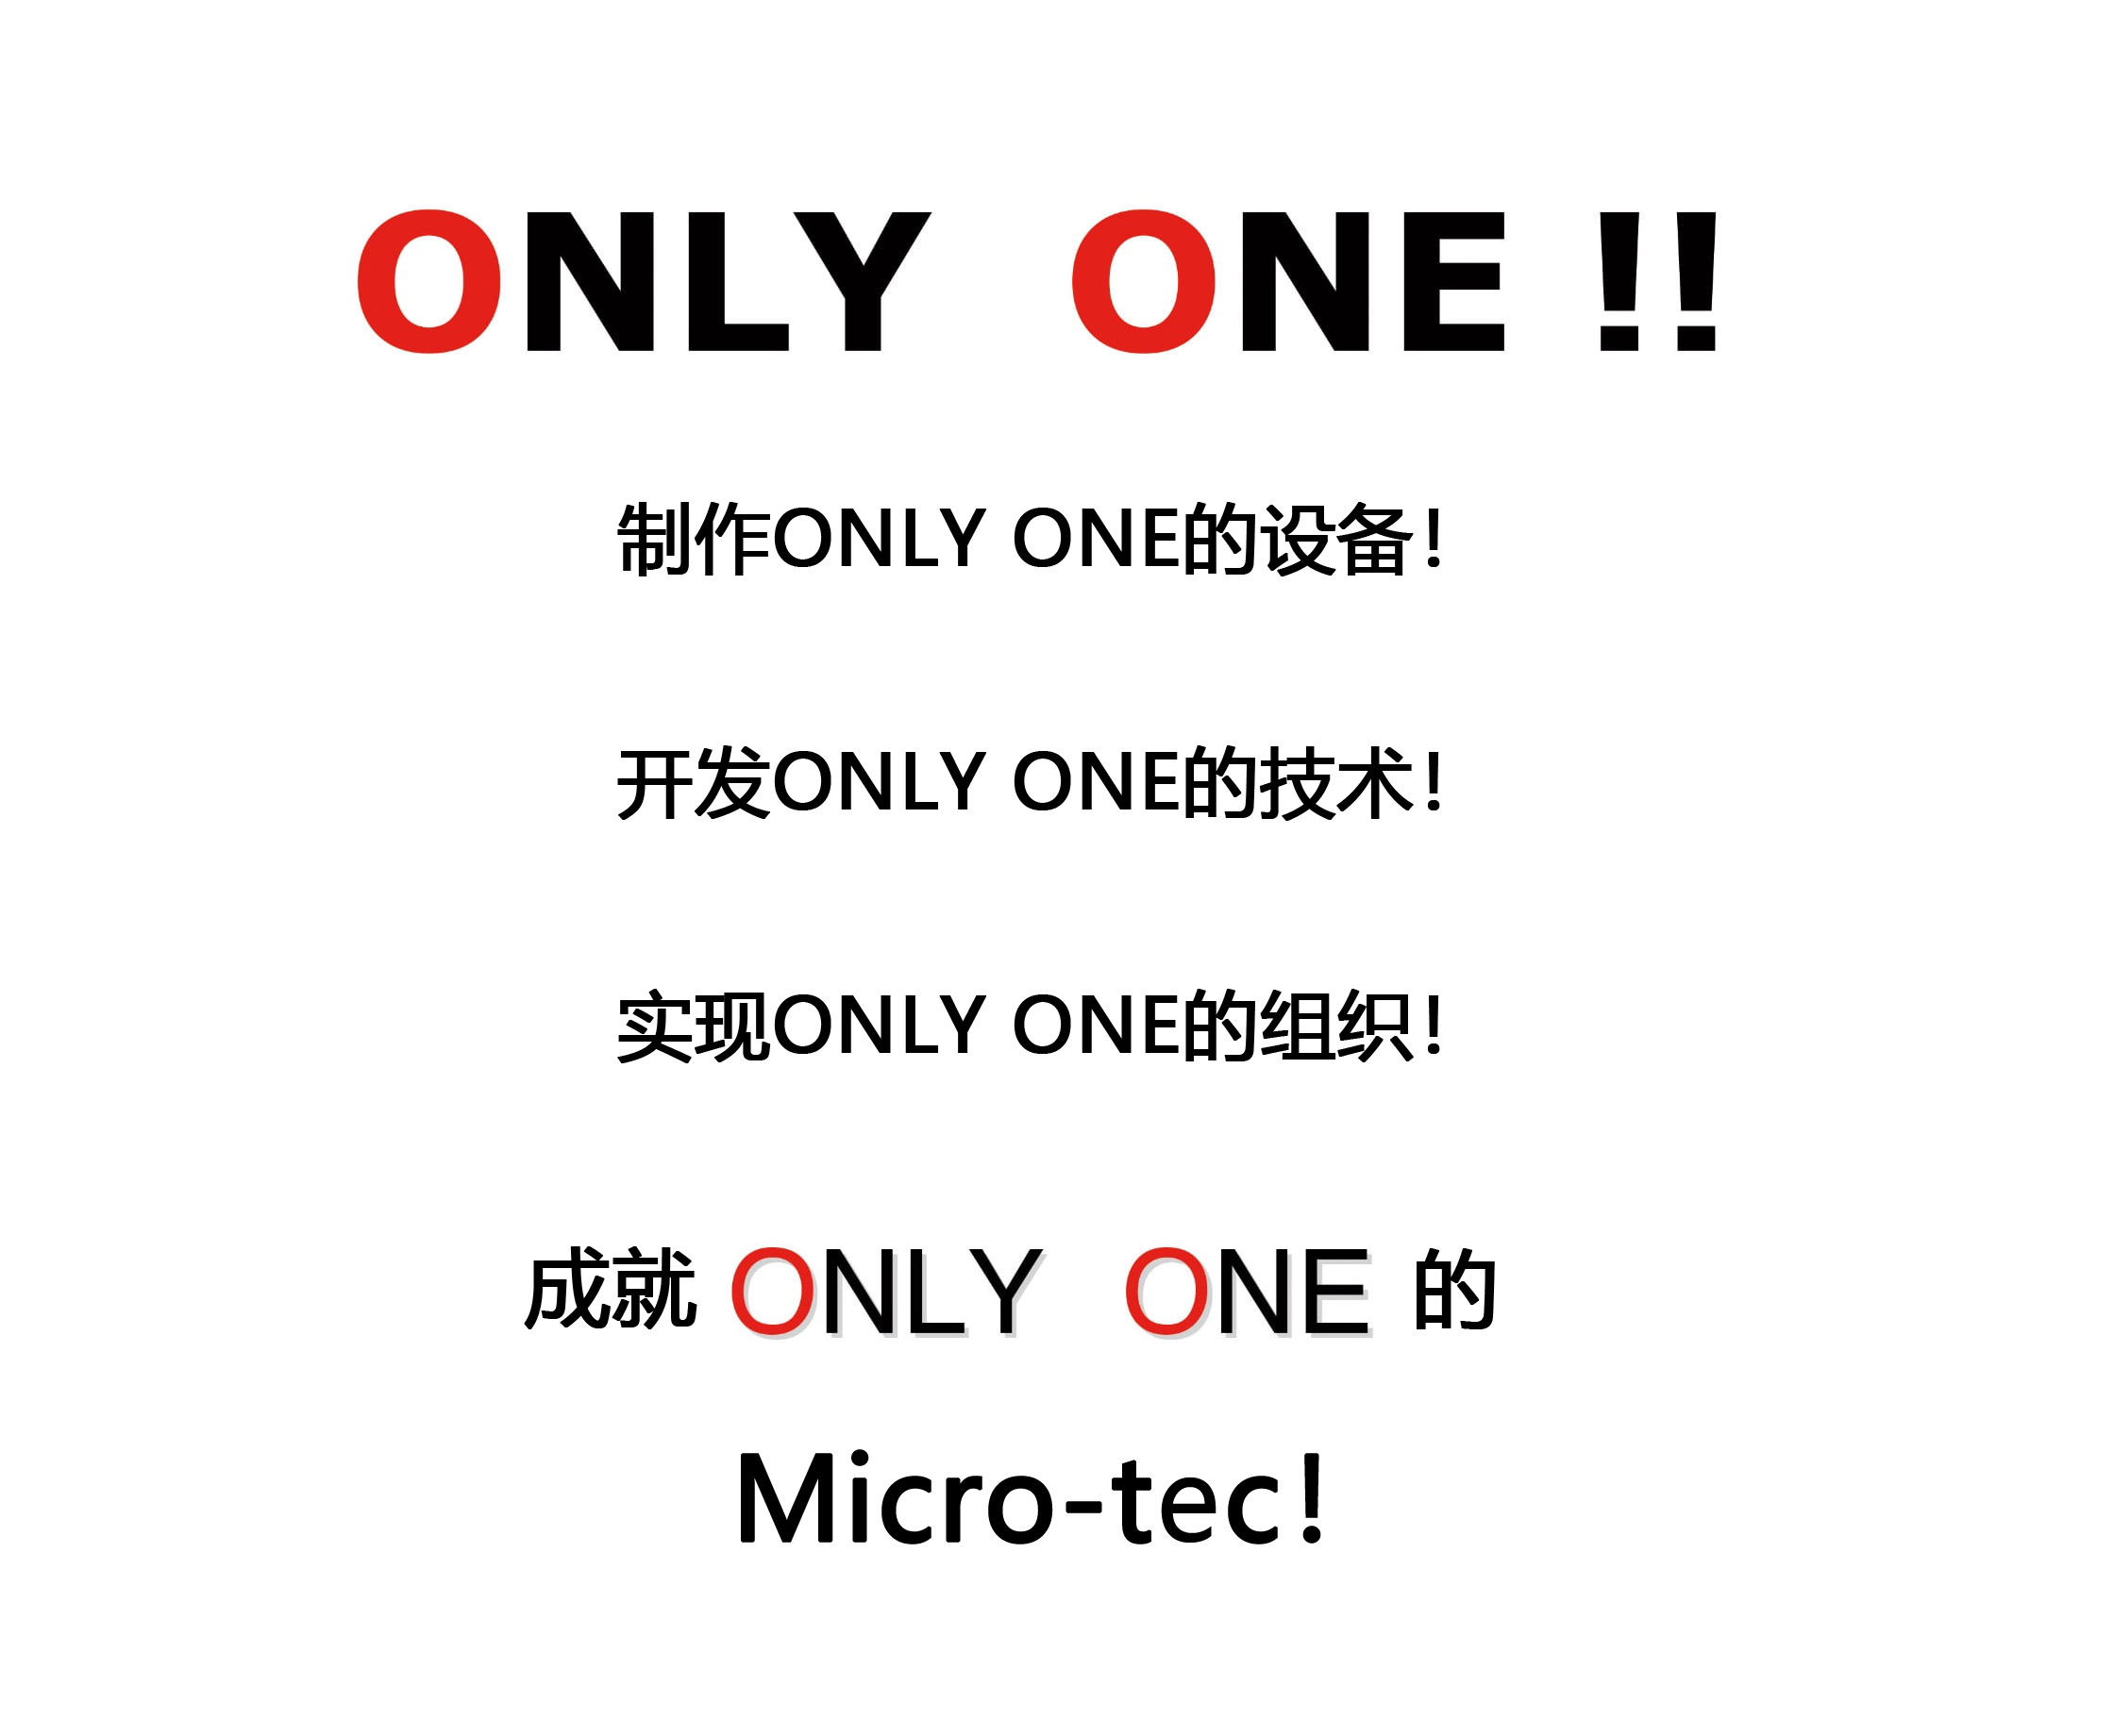 ONLY ONE!! ONLY ONEの装置をつくろう！ONLY ONEの技術を作ろう!ONLY ONEの組織をつくろう!ONLY ONEのマイクロテックにしよう!